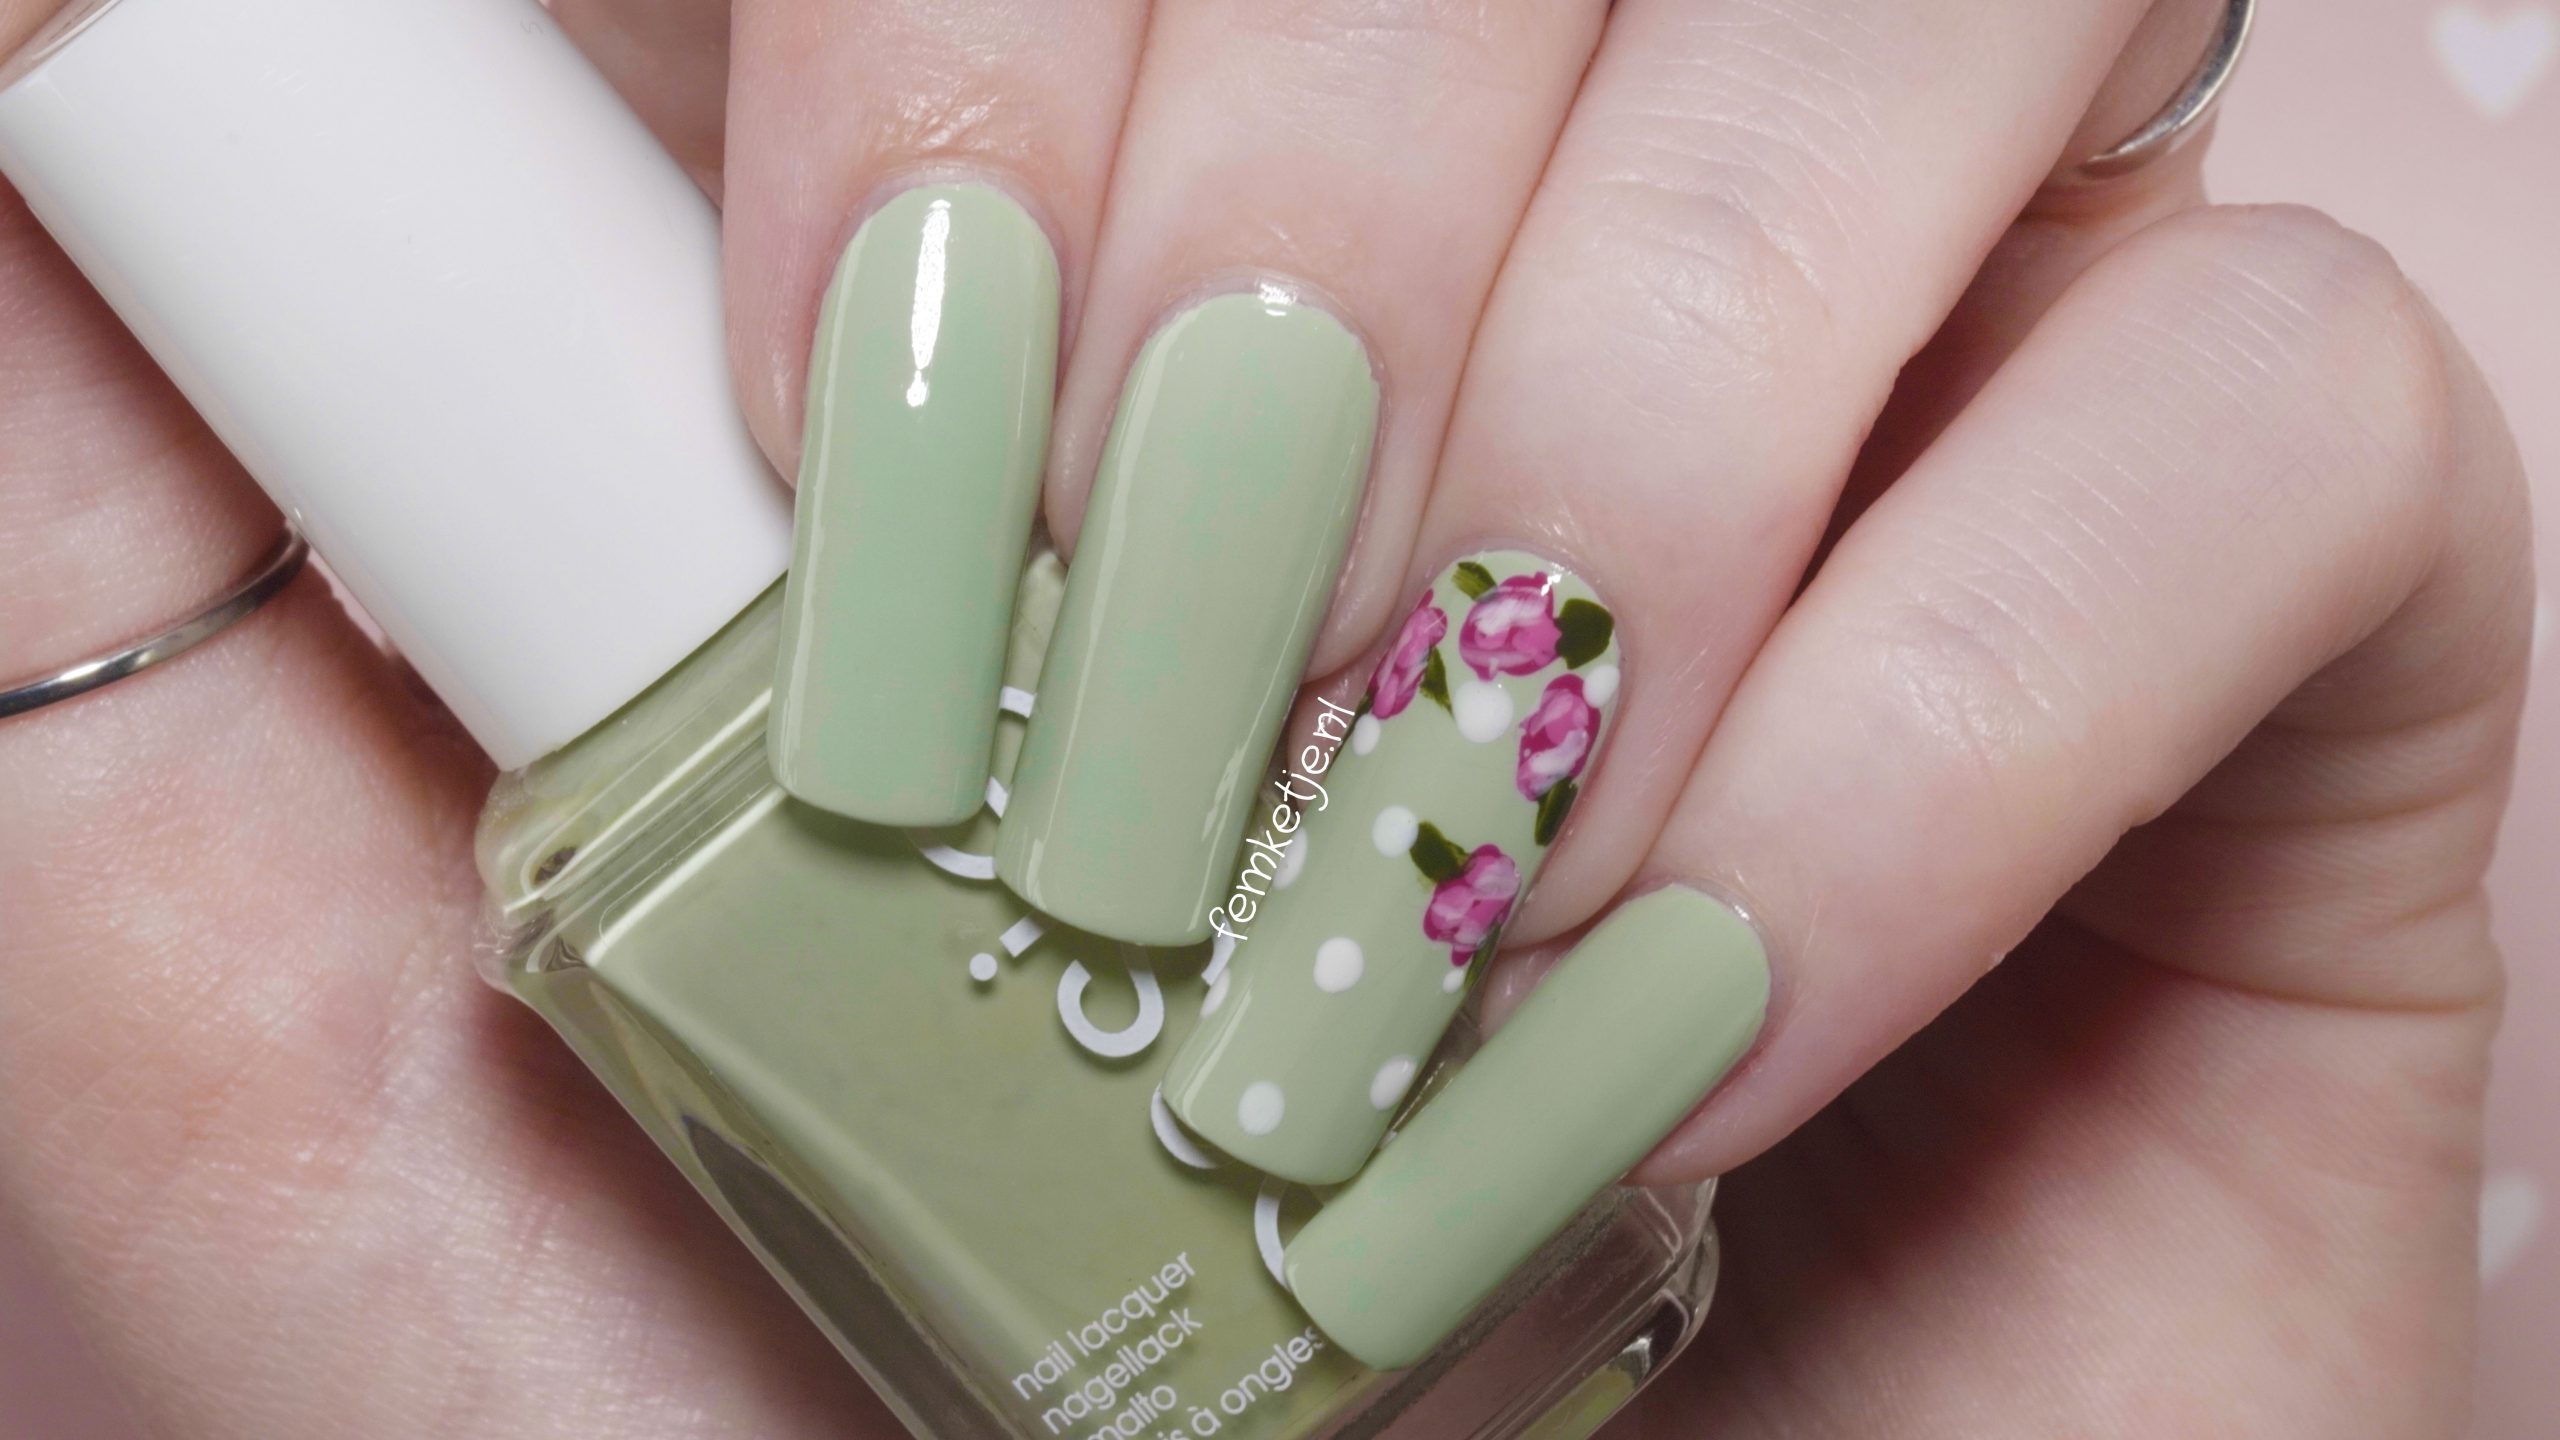 50 Summer Manicure Designs That Can Only Be Described As Works of Art -  Zoella